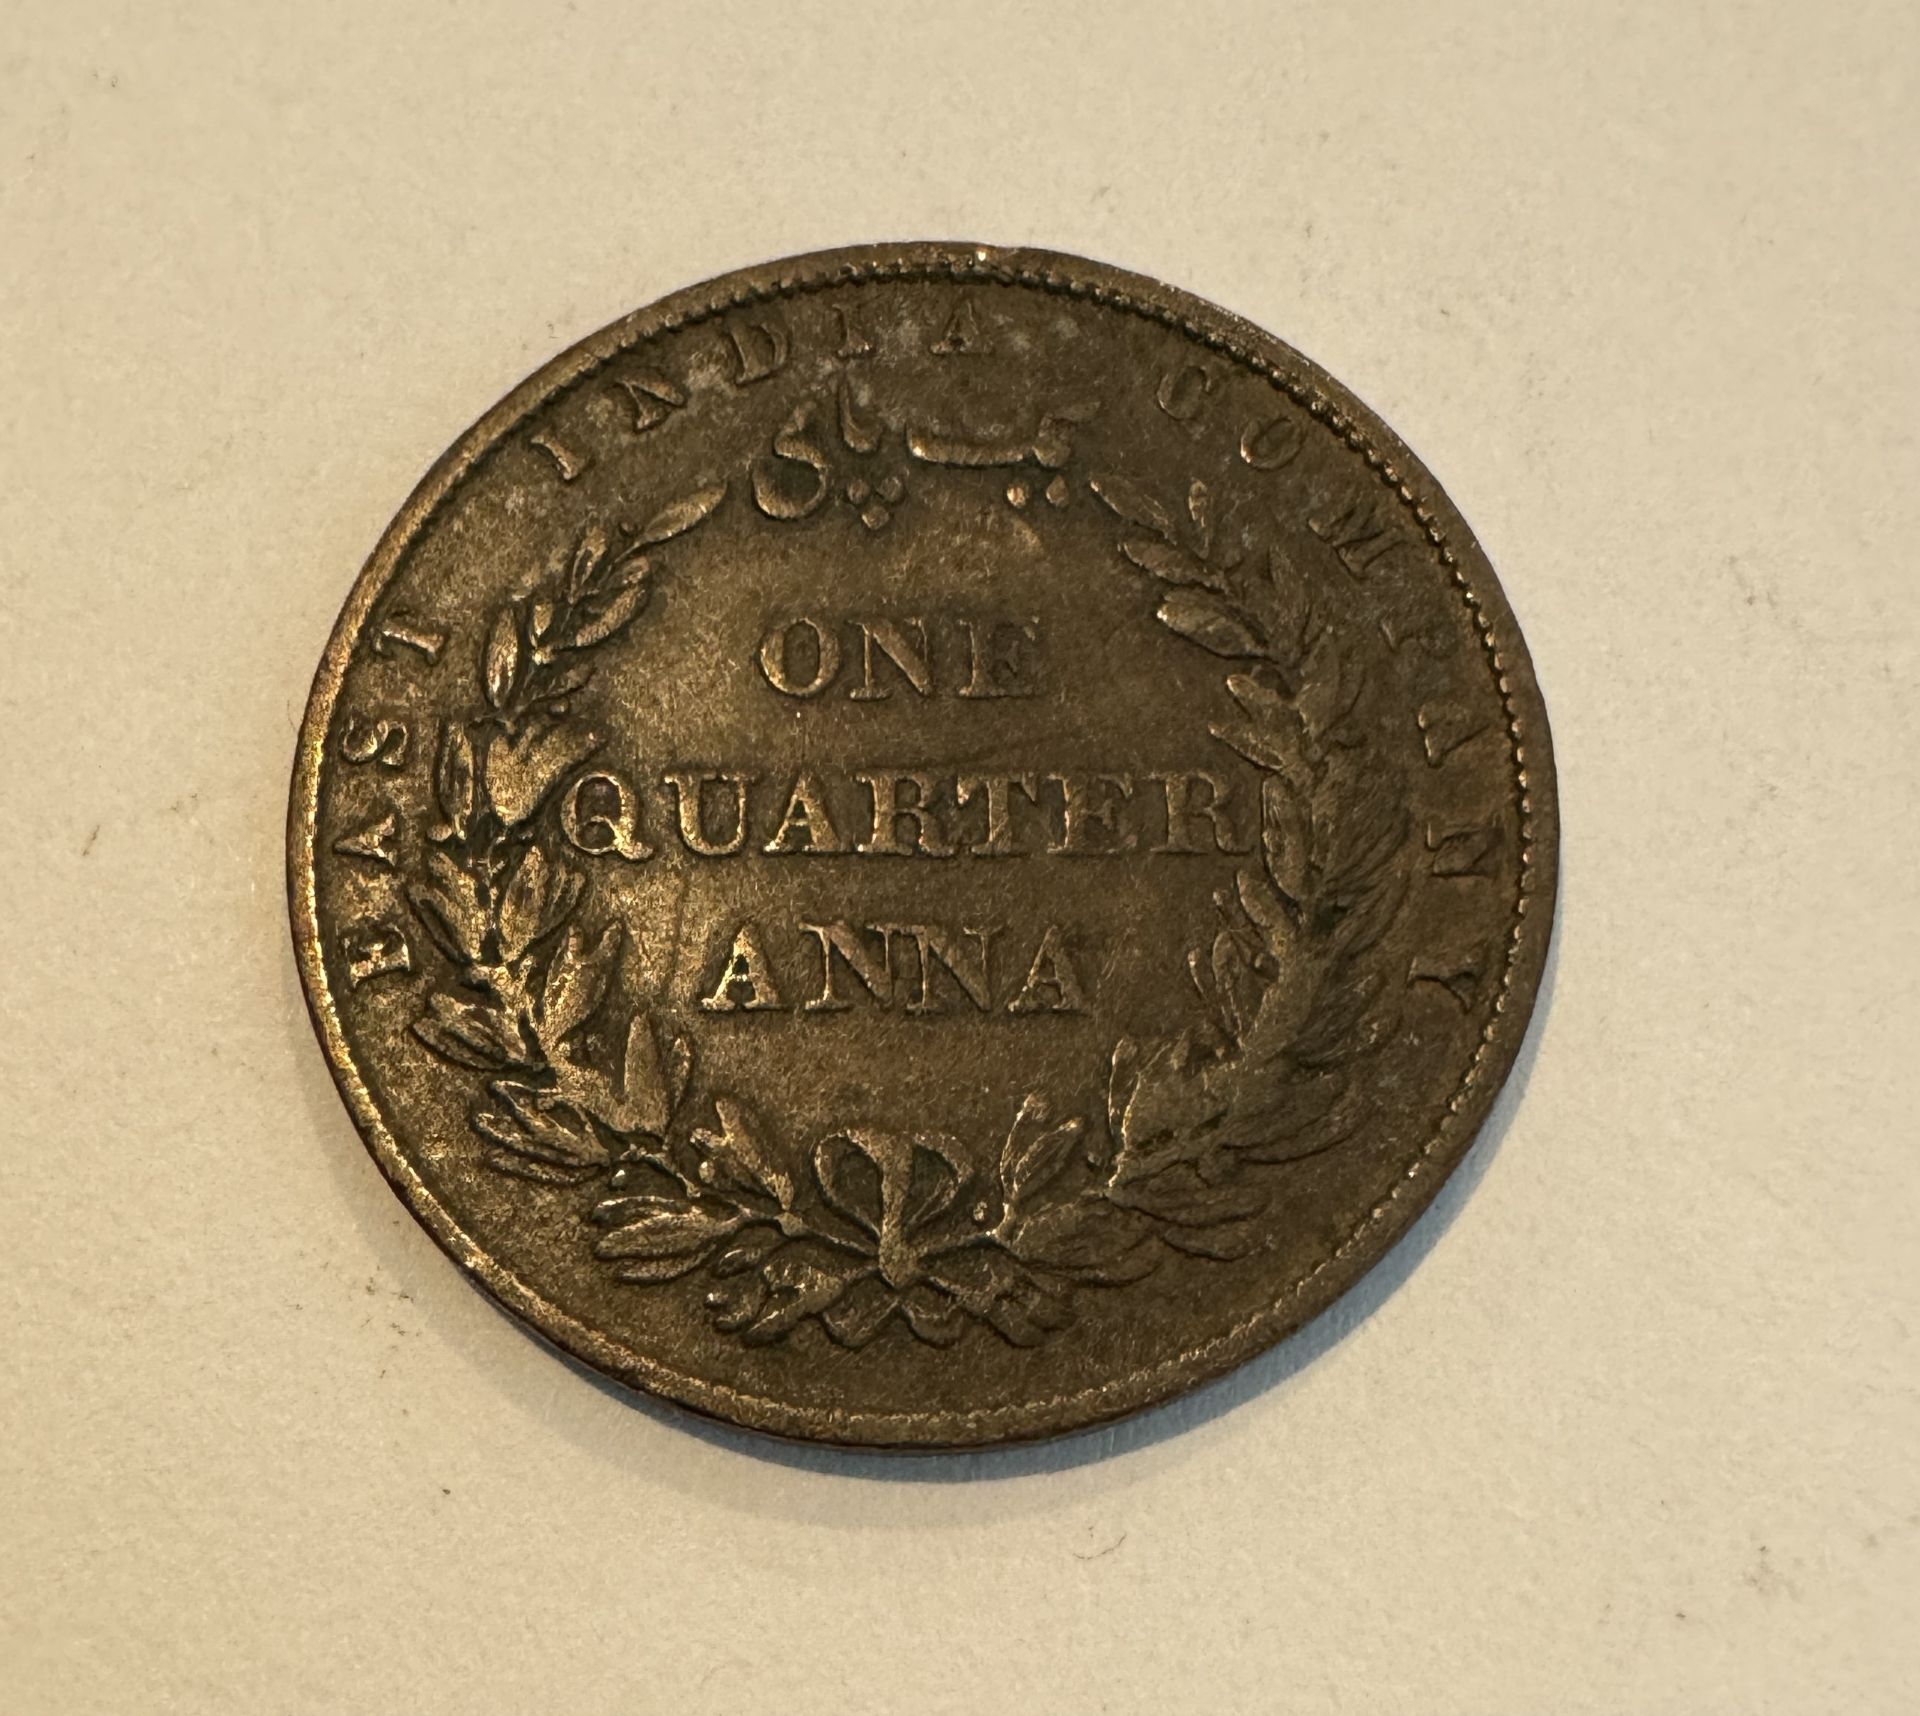 1858 1\4 ONE QUARTER ANNA - EAST INDIAN COMPANY - Image 2 of 2